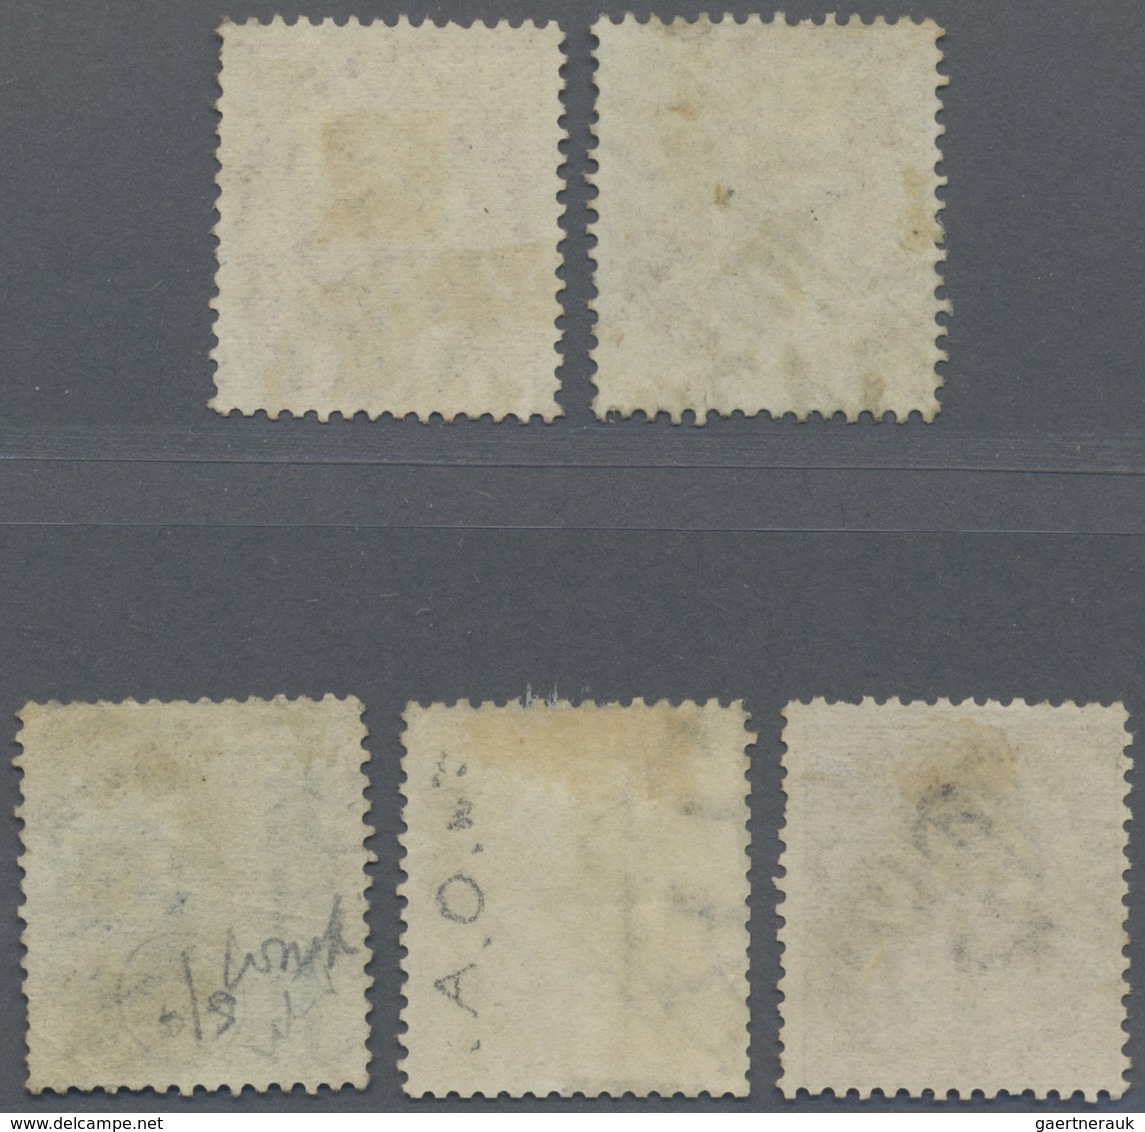 O Malaiische Staaten - Straits Settlements: 1856-65 India Used In Penang: Five East India Stamps Used - Straits Settlements